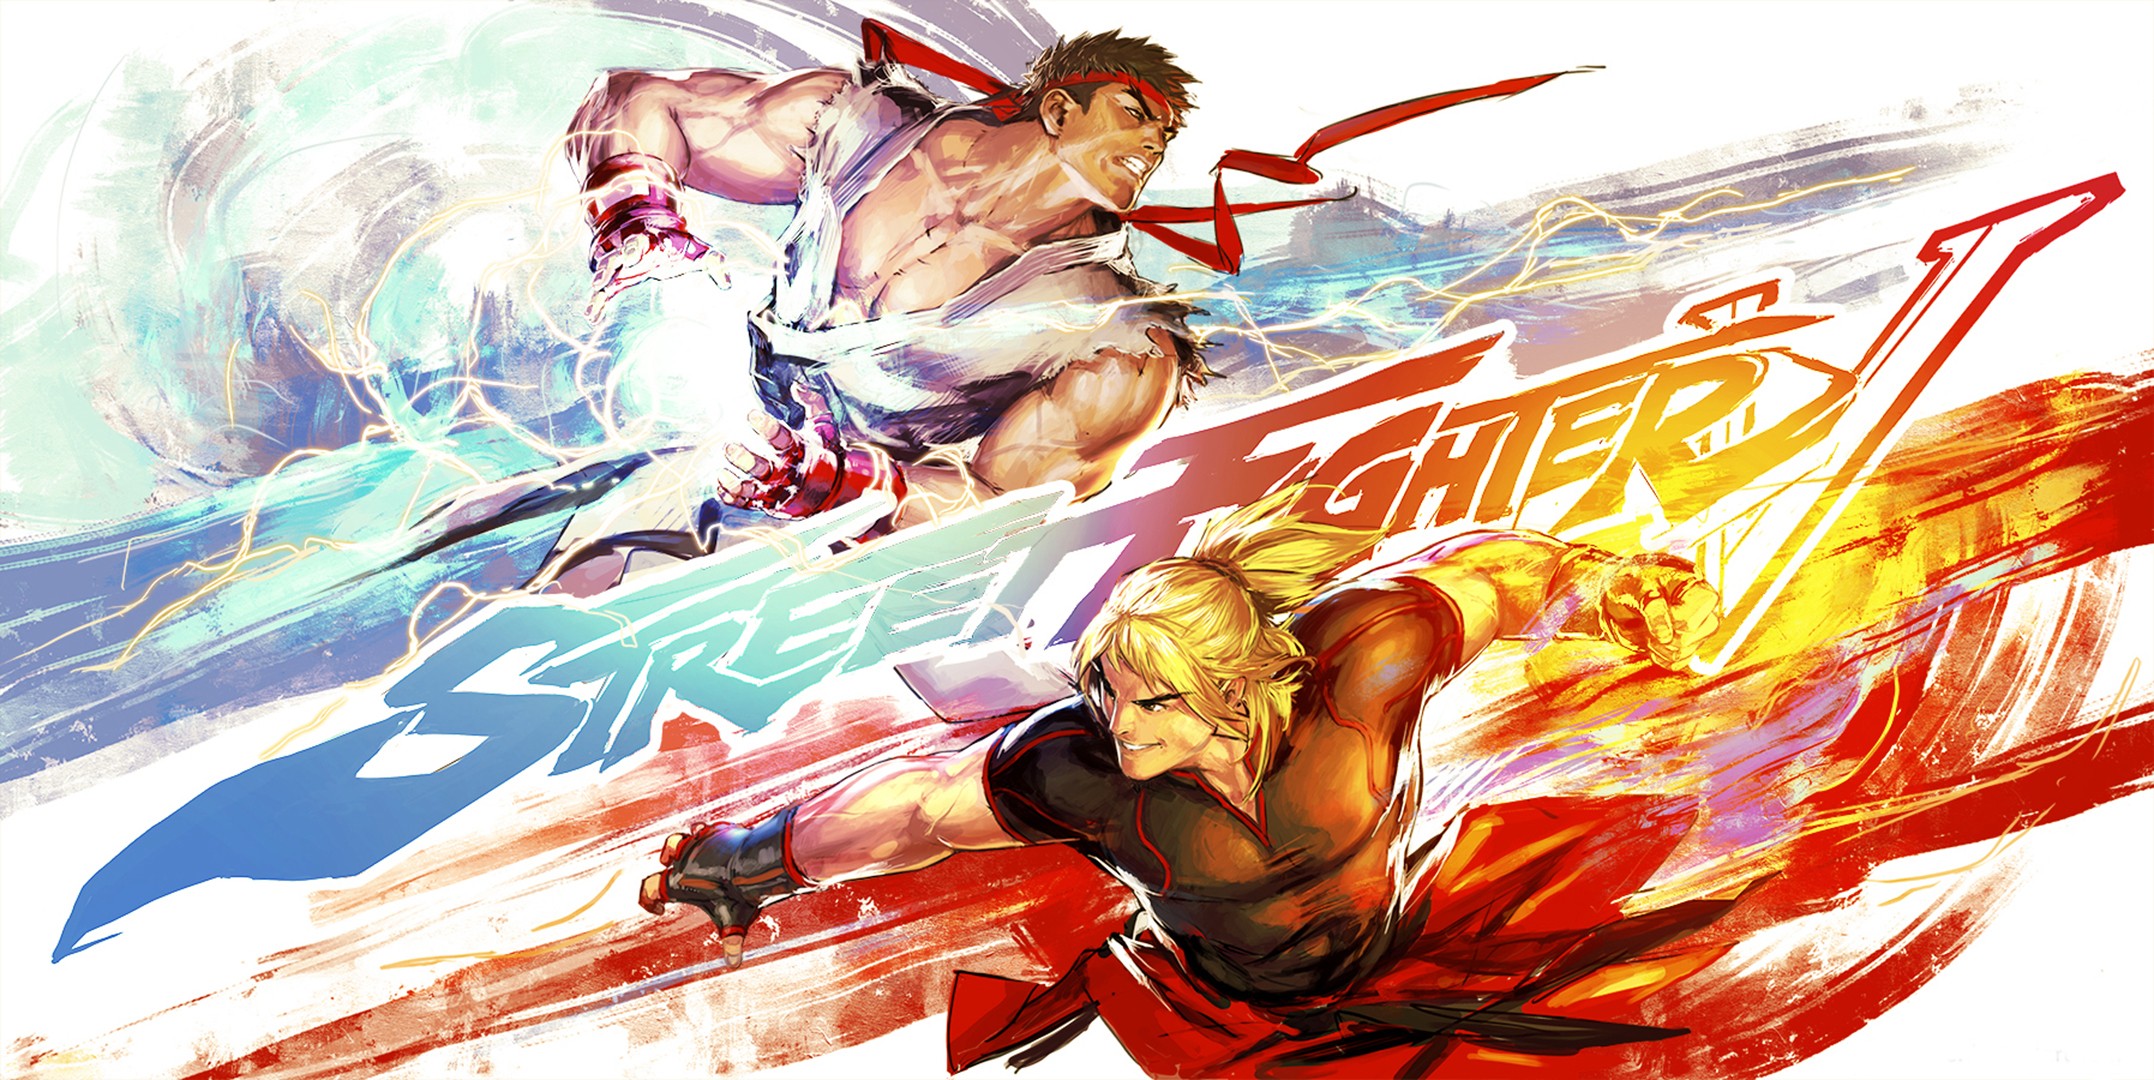 Street Fighter Video Games Artwork Wallpapers Hd Desktop And Mobile Backgrounds